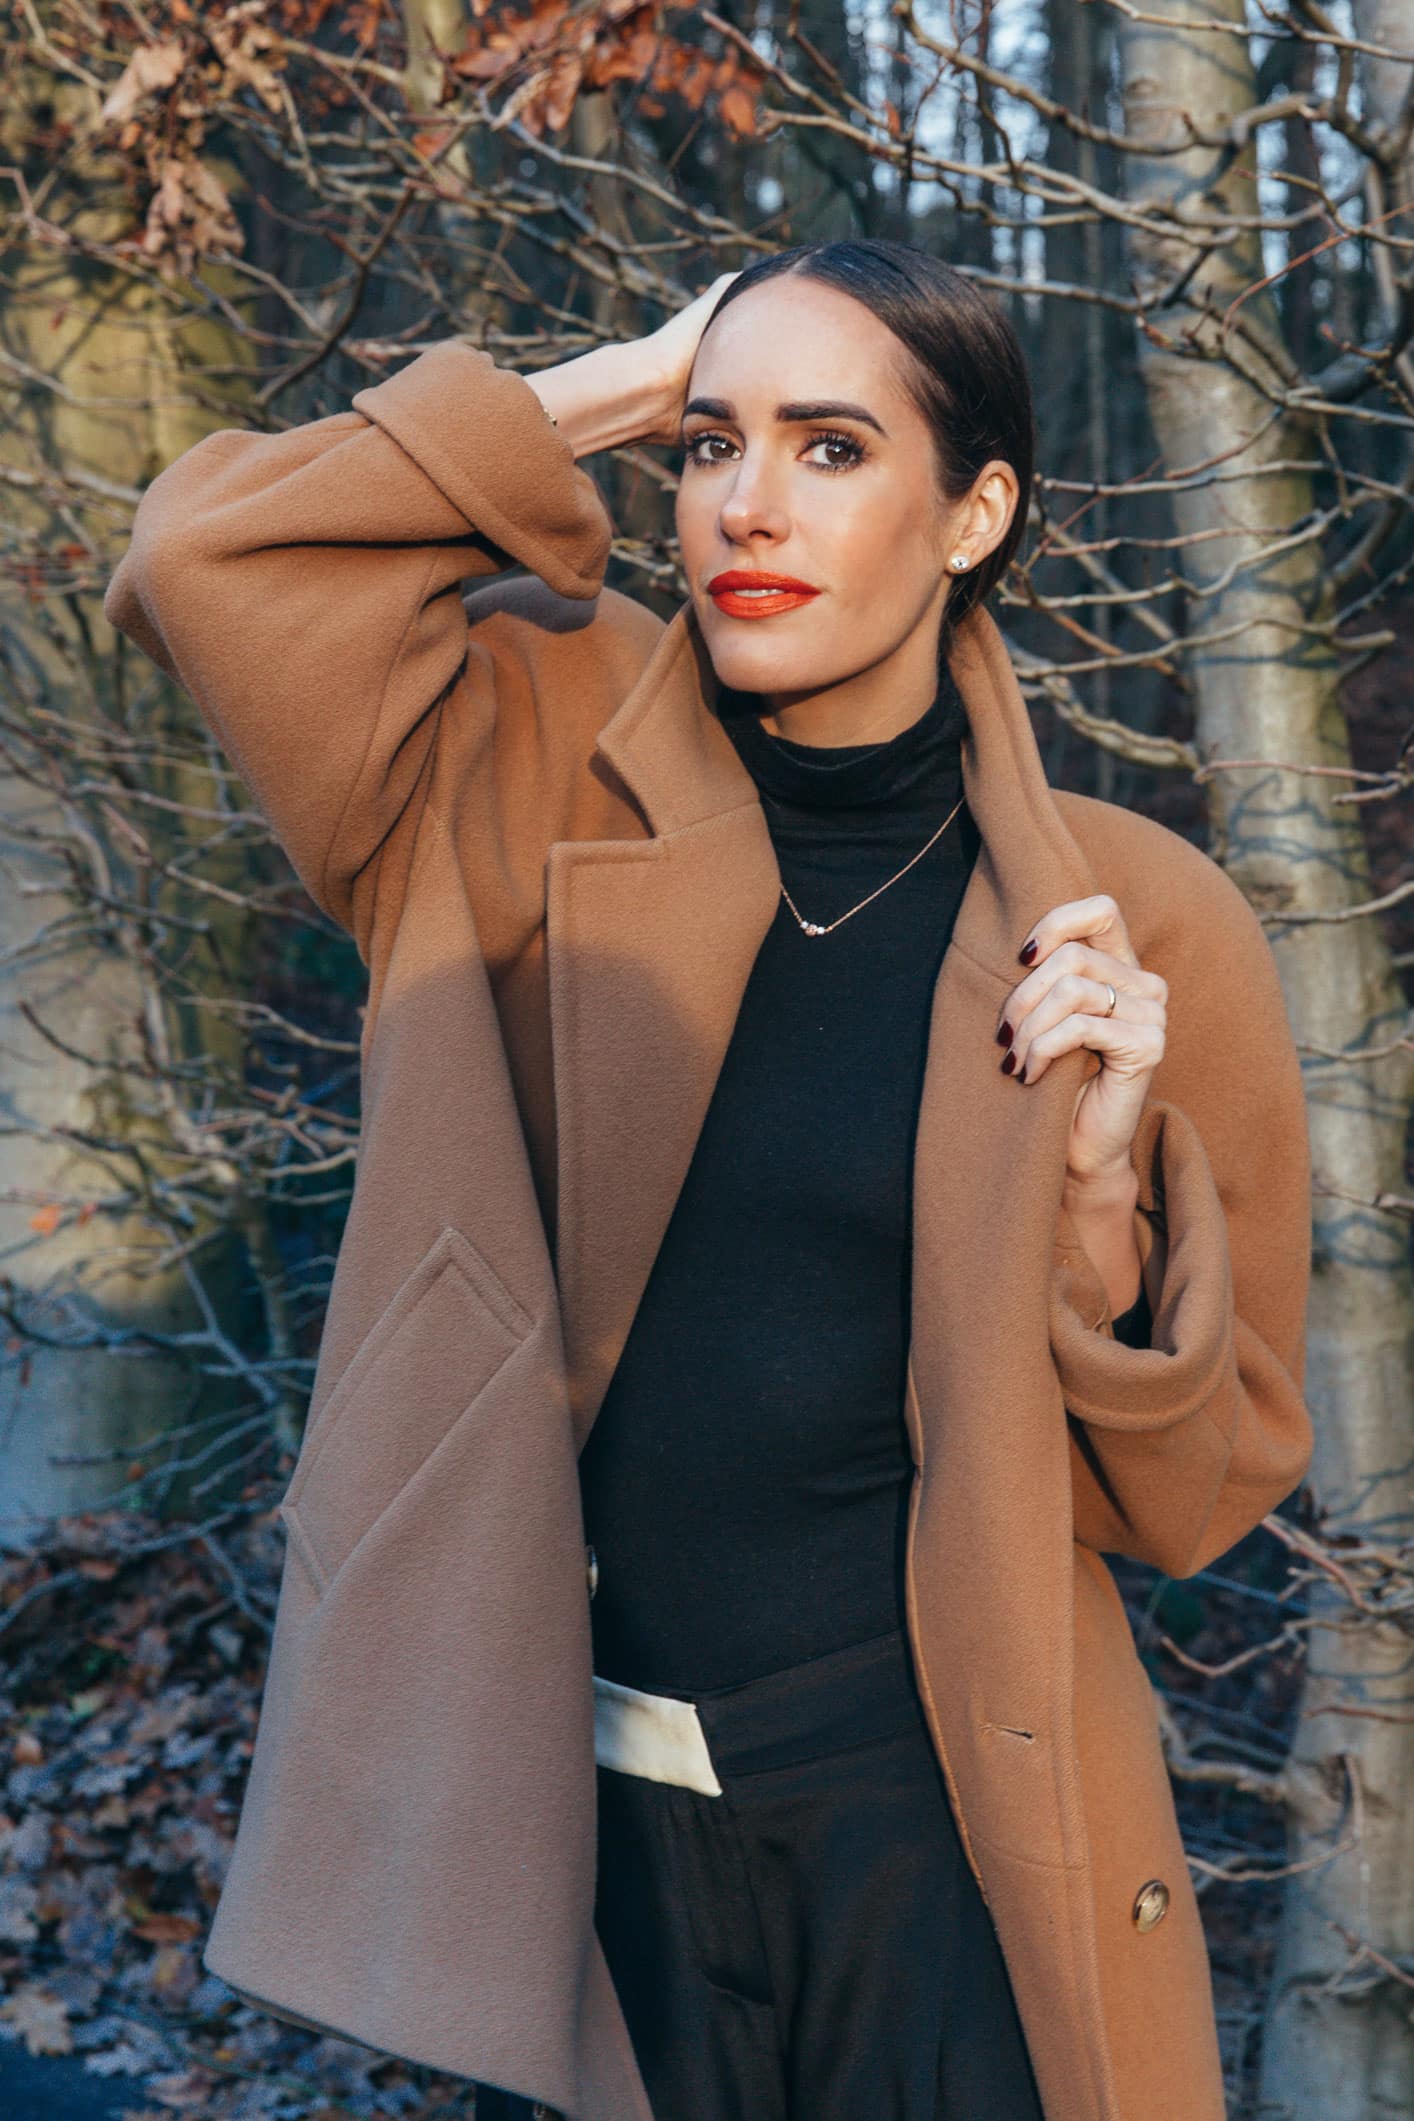 Louise Roe 2019 New Years Resolutions